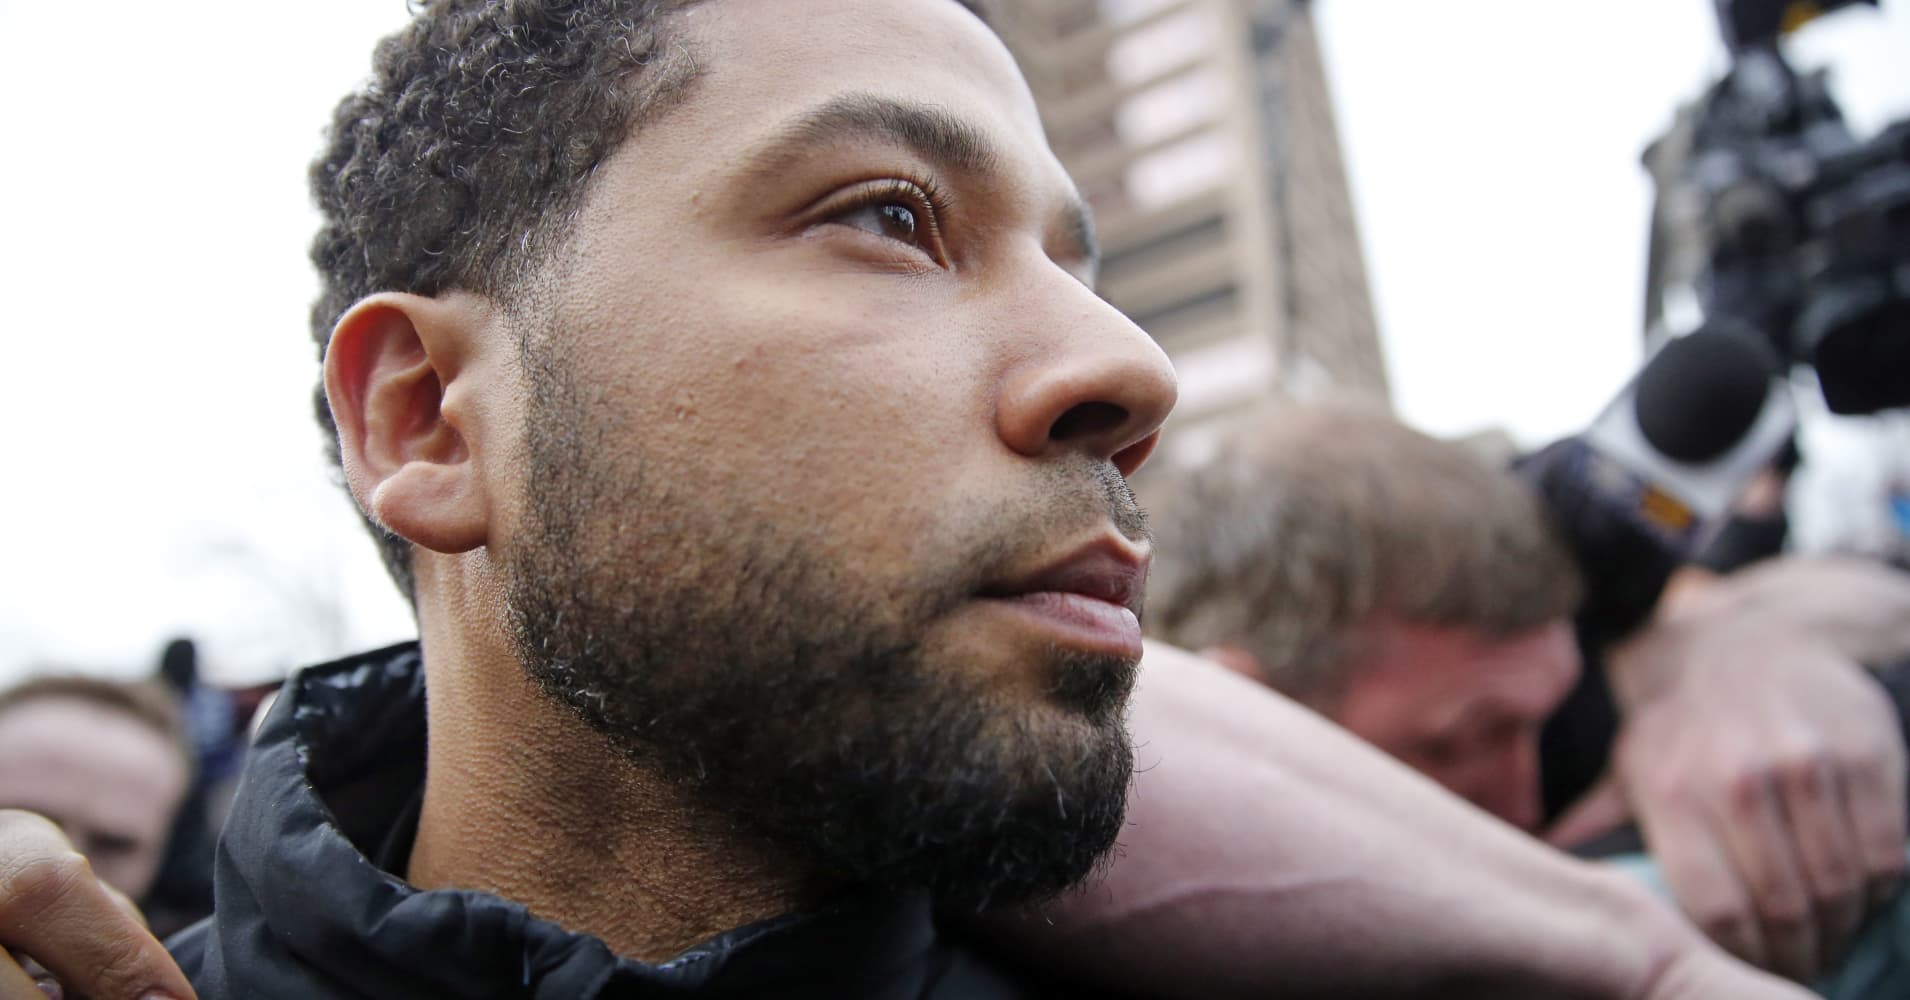 Smollett and his lawyers have denied the allegations against him